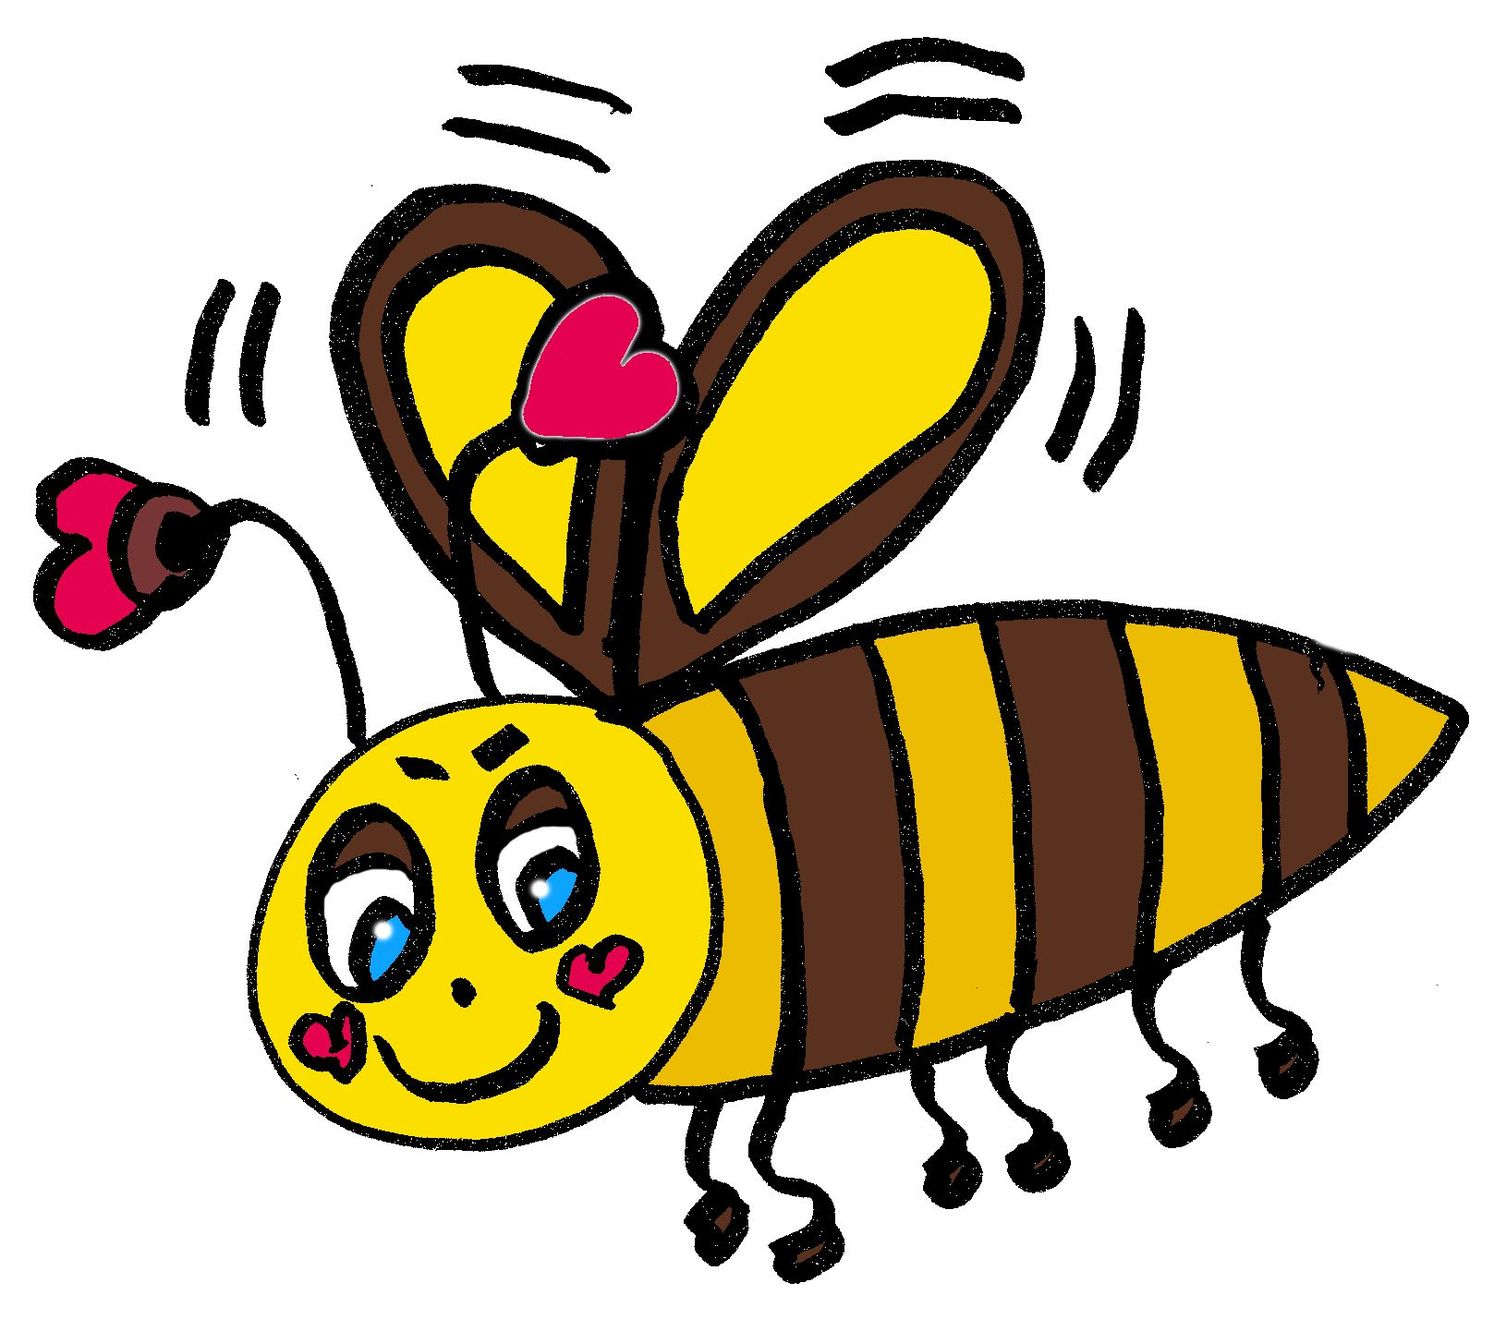 Cartoon Bees Images - Clipart library